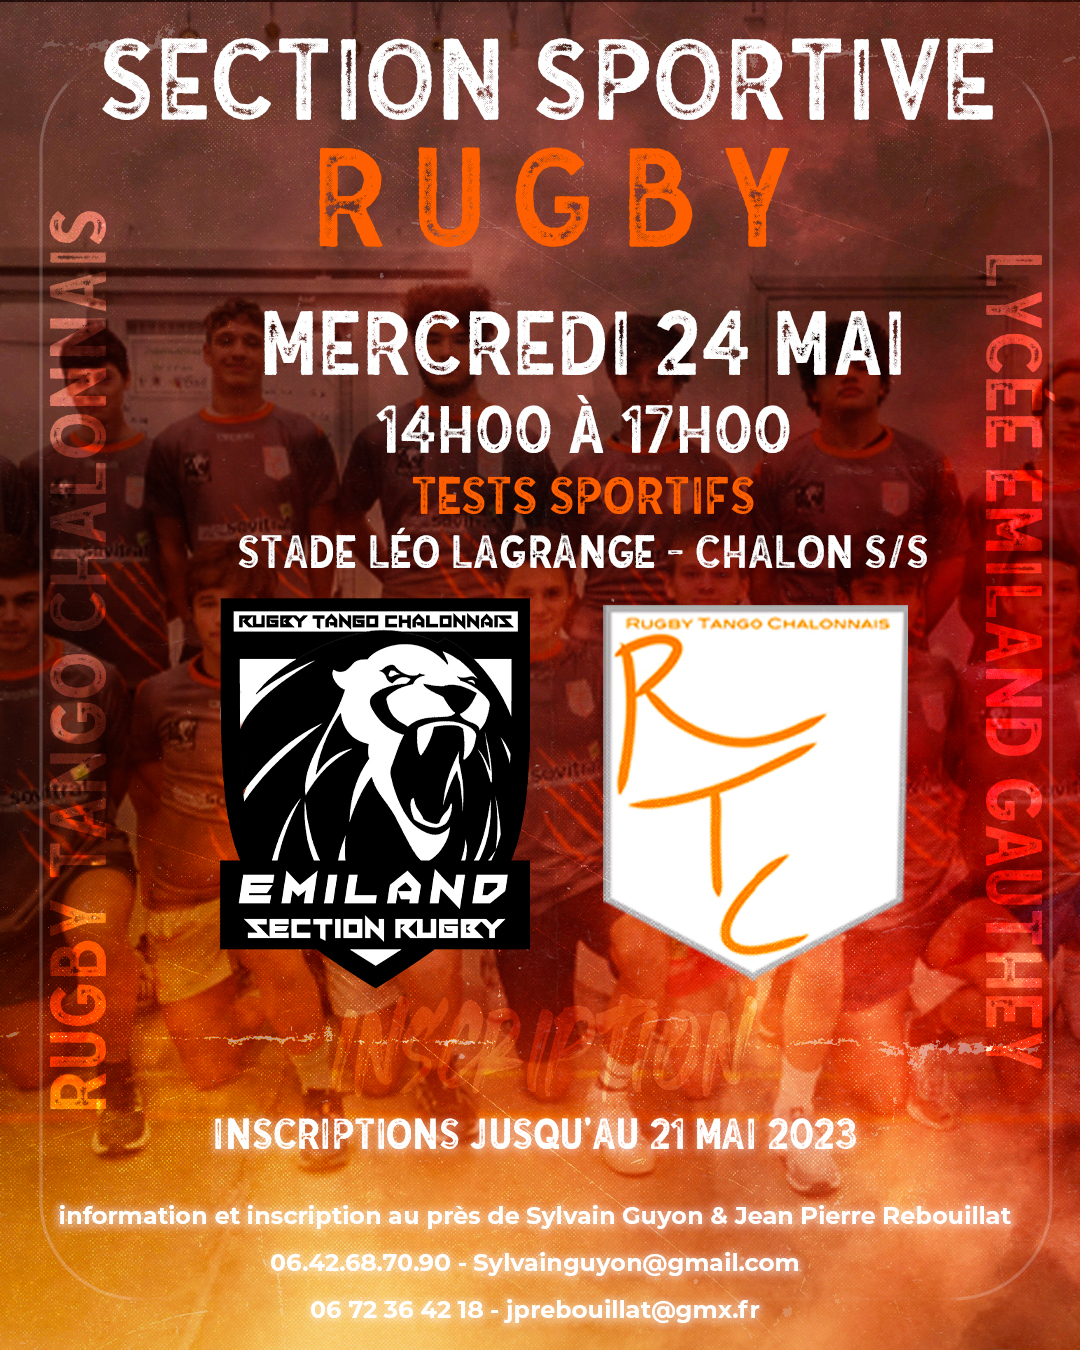 Section sportive rugby